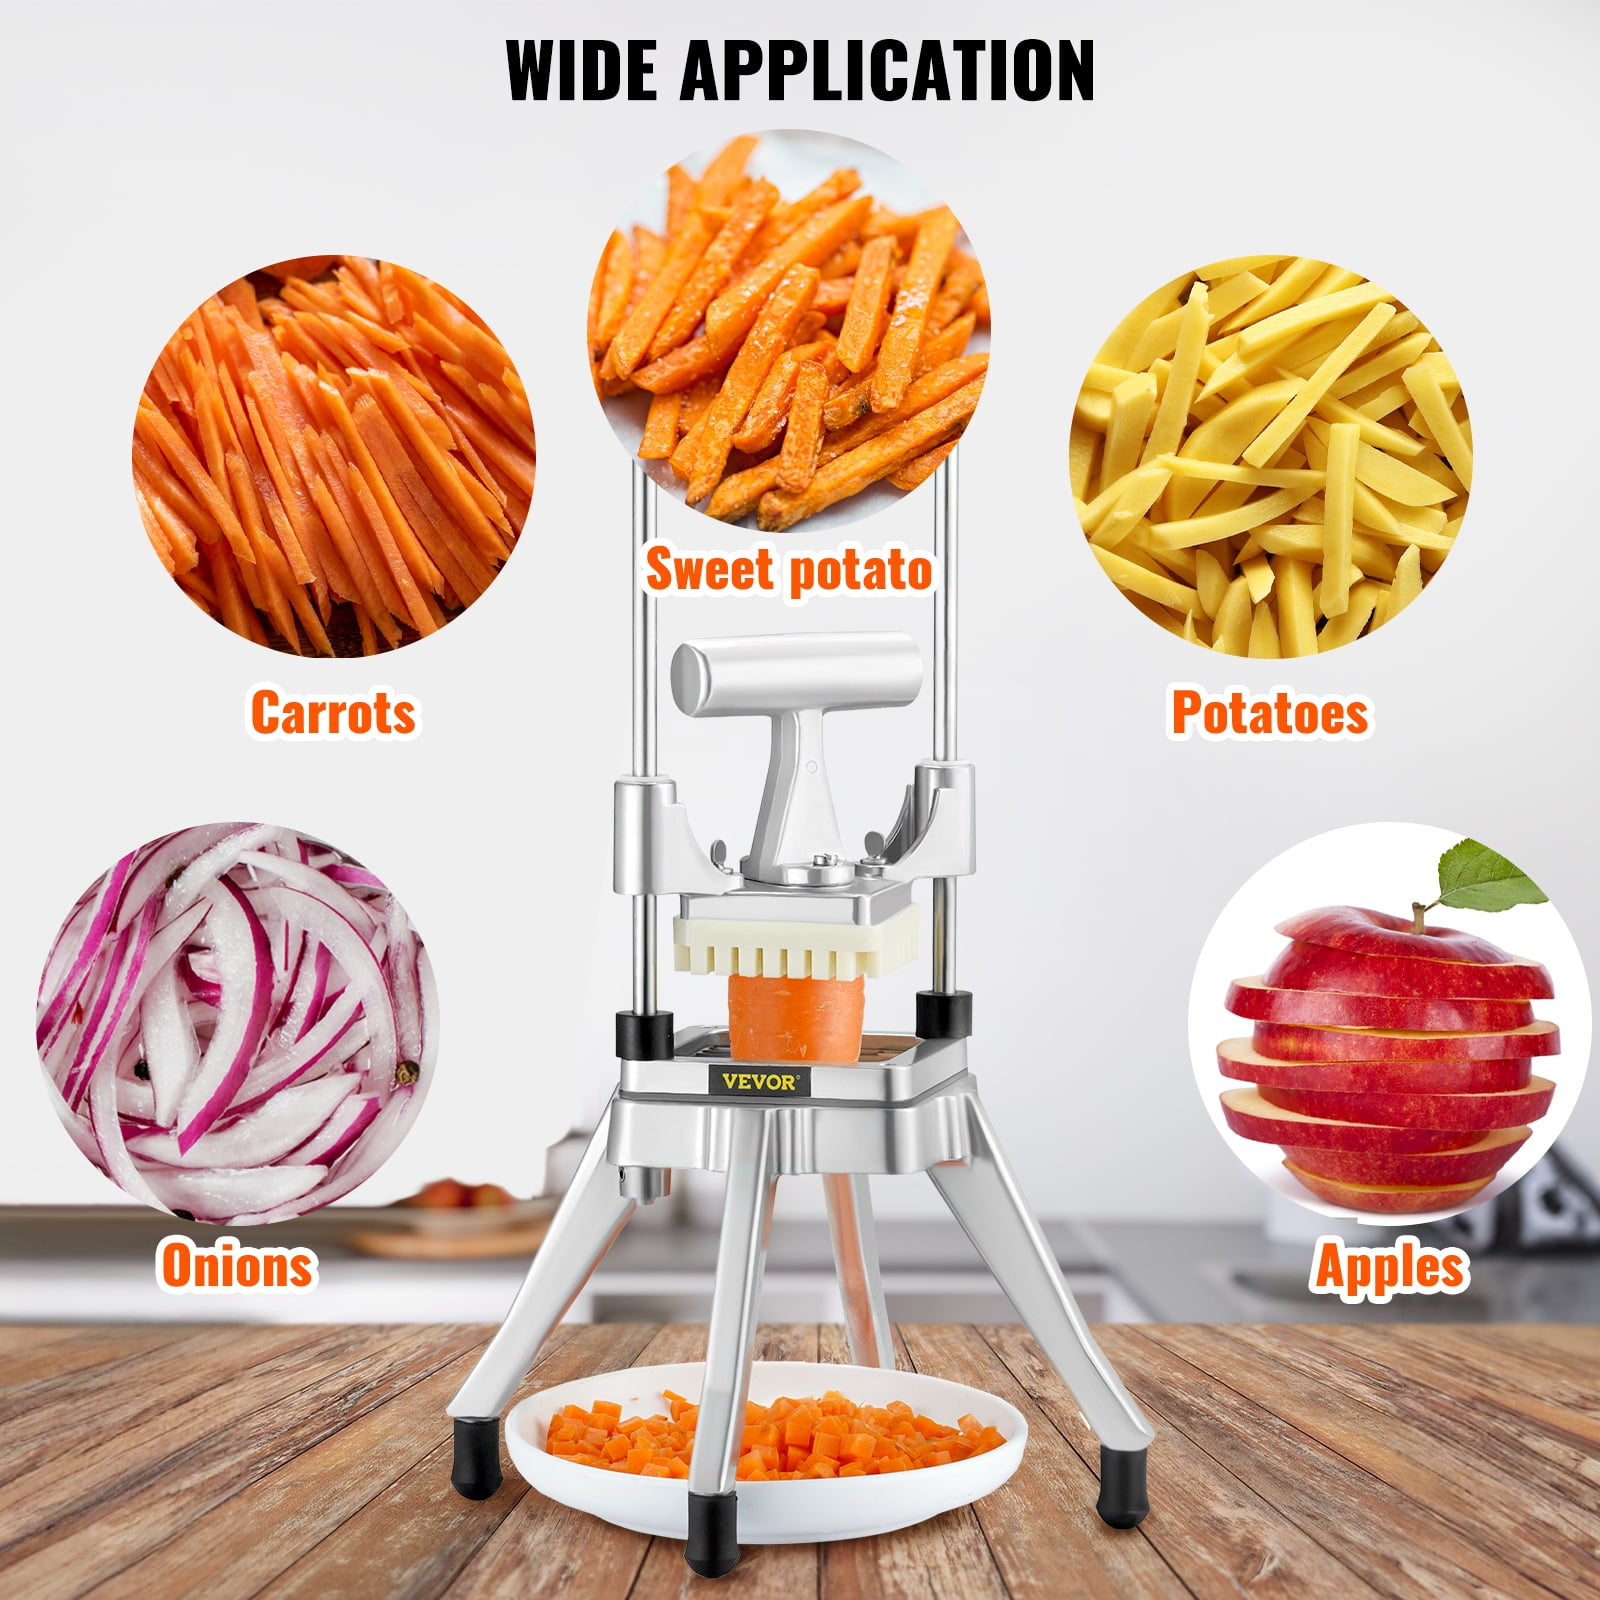 Commercial Onion Slicer With 3/8 Blades Stability Onion Chopper Wavy In  Shape, 1 - Kroger